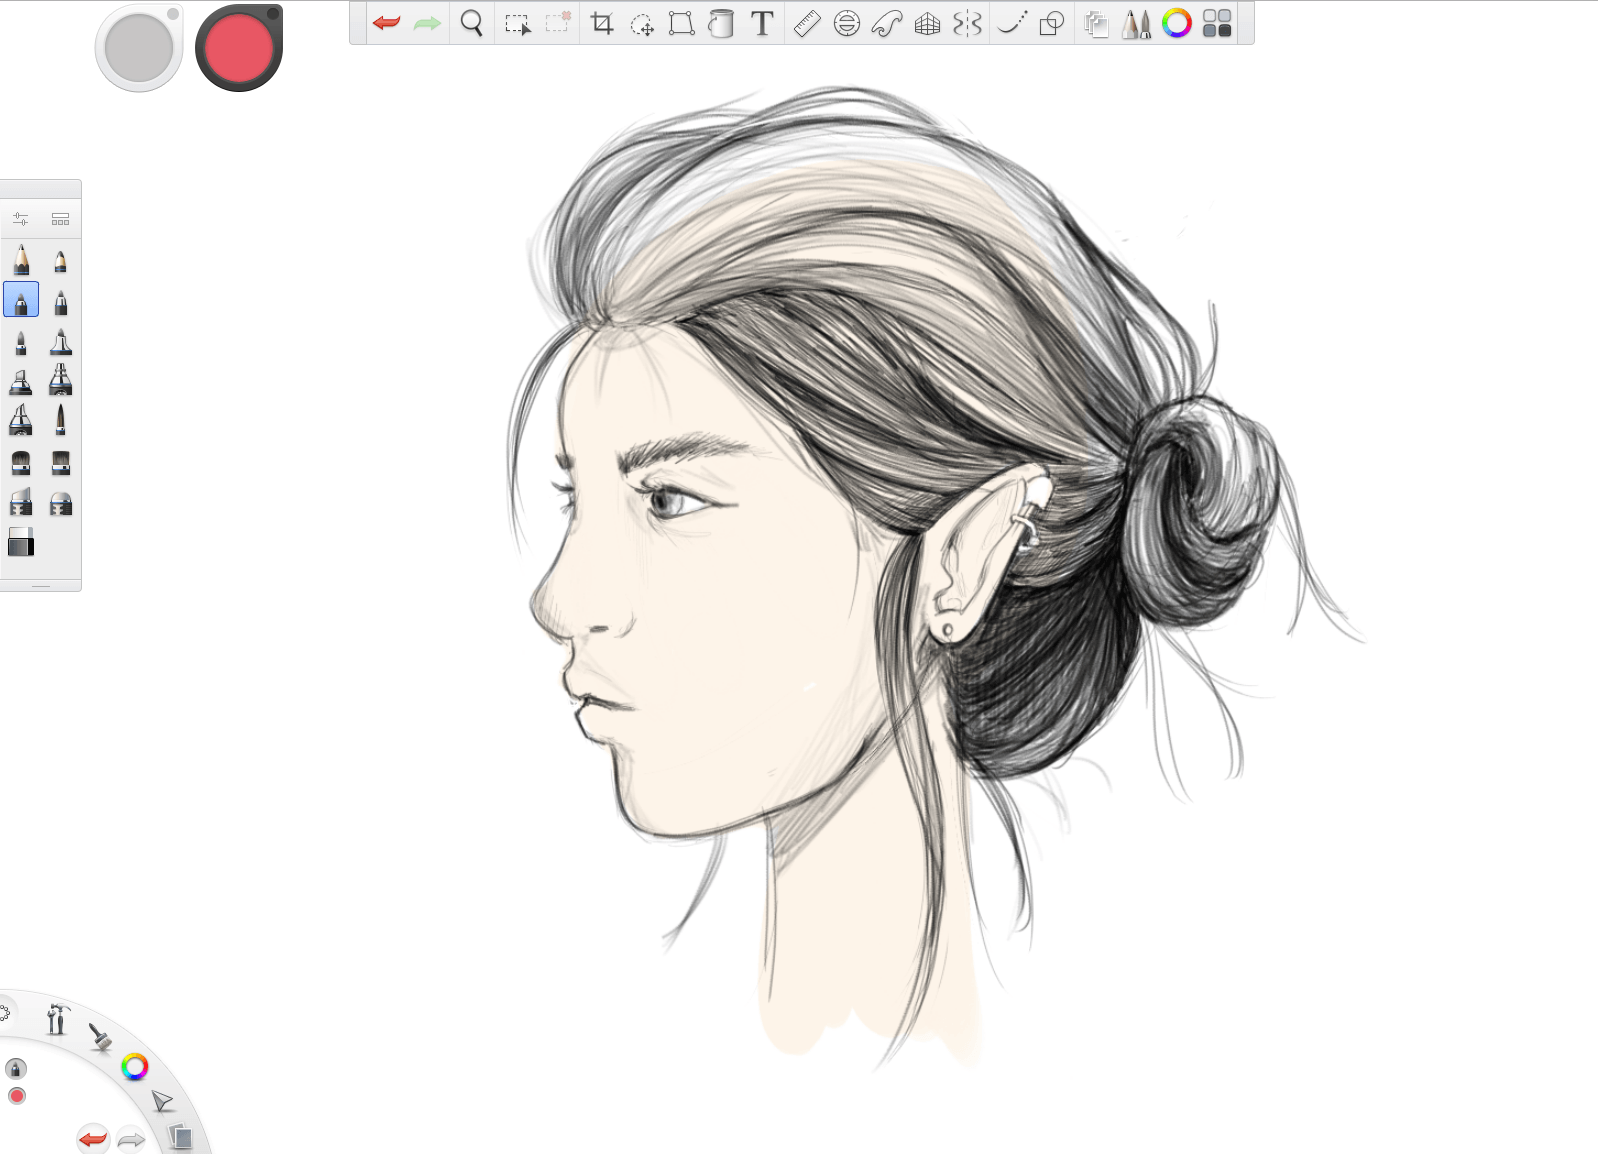 Woman with Flowing Hair with Back Logo - How to Draw Hair Tutorial: Step by Step Instructions